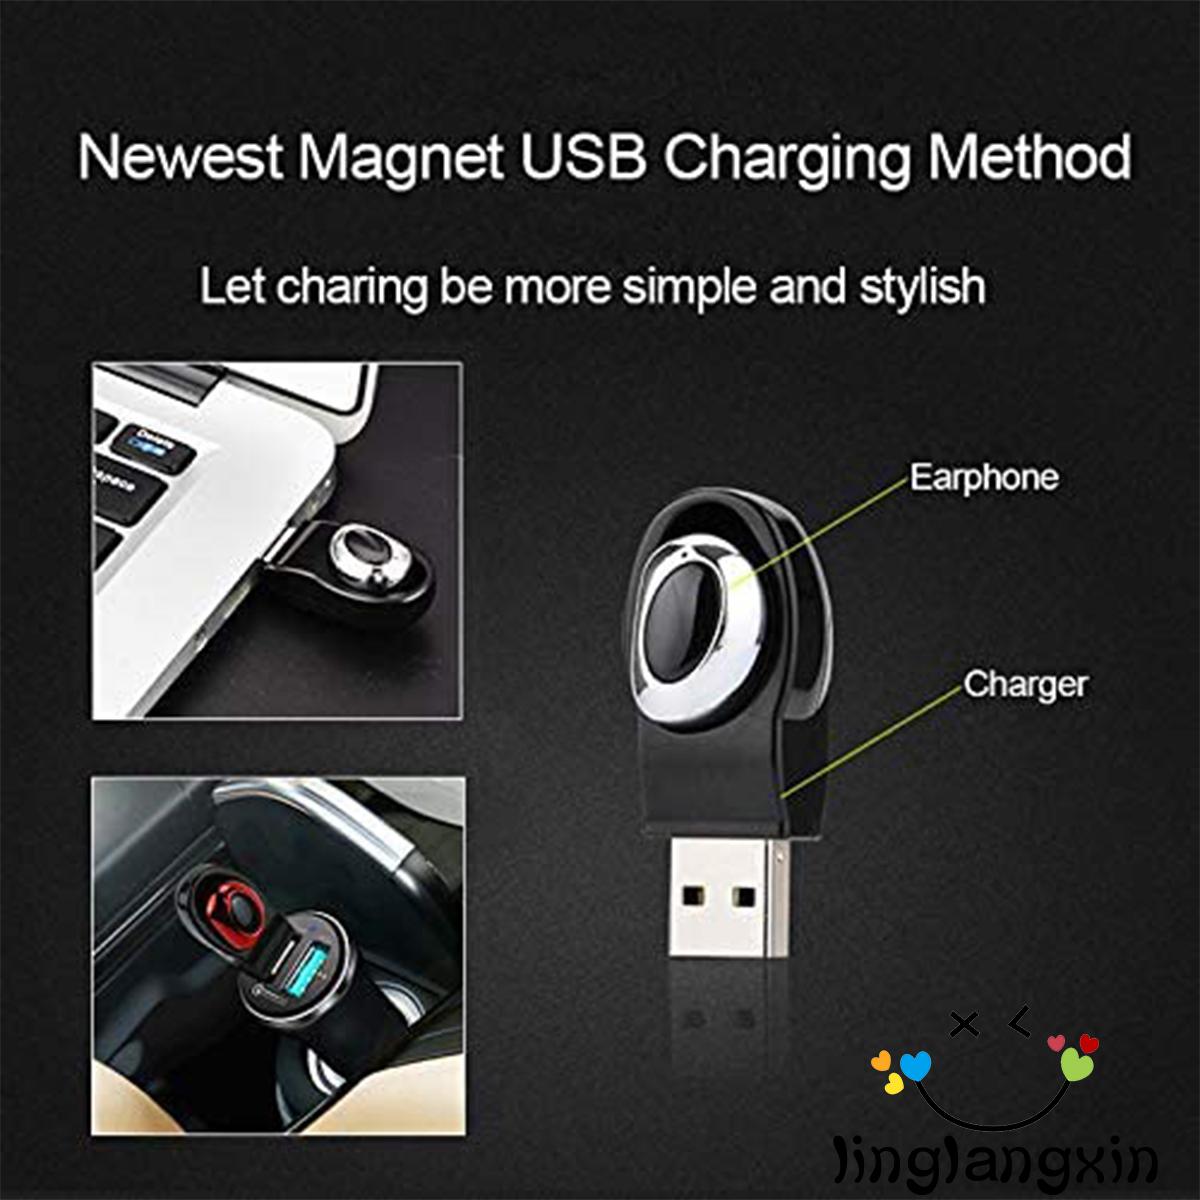 ✦LD-Magnet USB Charging Music Handsfree Headphone Headset, In-ear Invisible Earpiece for Phone